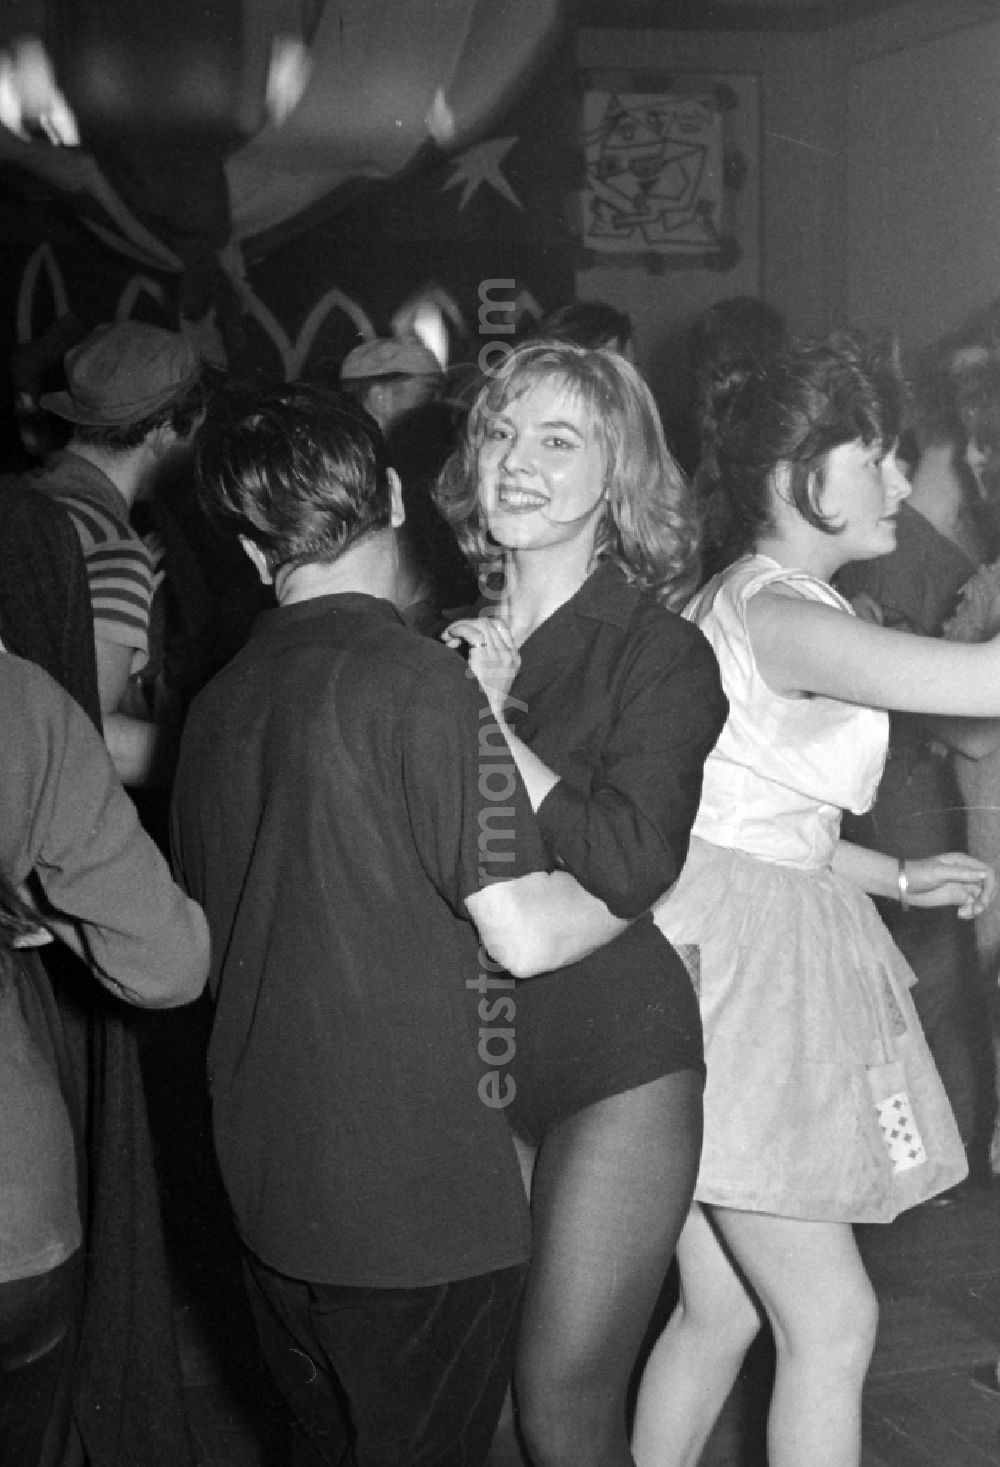 Potsdam: The actress Annekathrin Buerger during a carnival event at the film school in the district Babelsberg in Potsdam in the state Brandenburg on the territory of the former GDR, German Democratic Republic